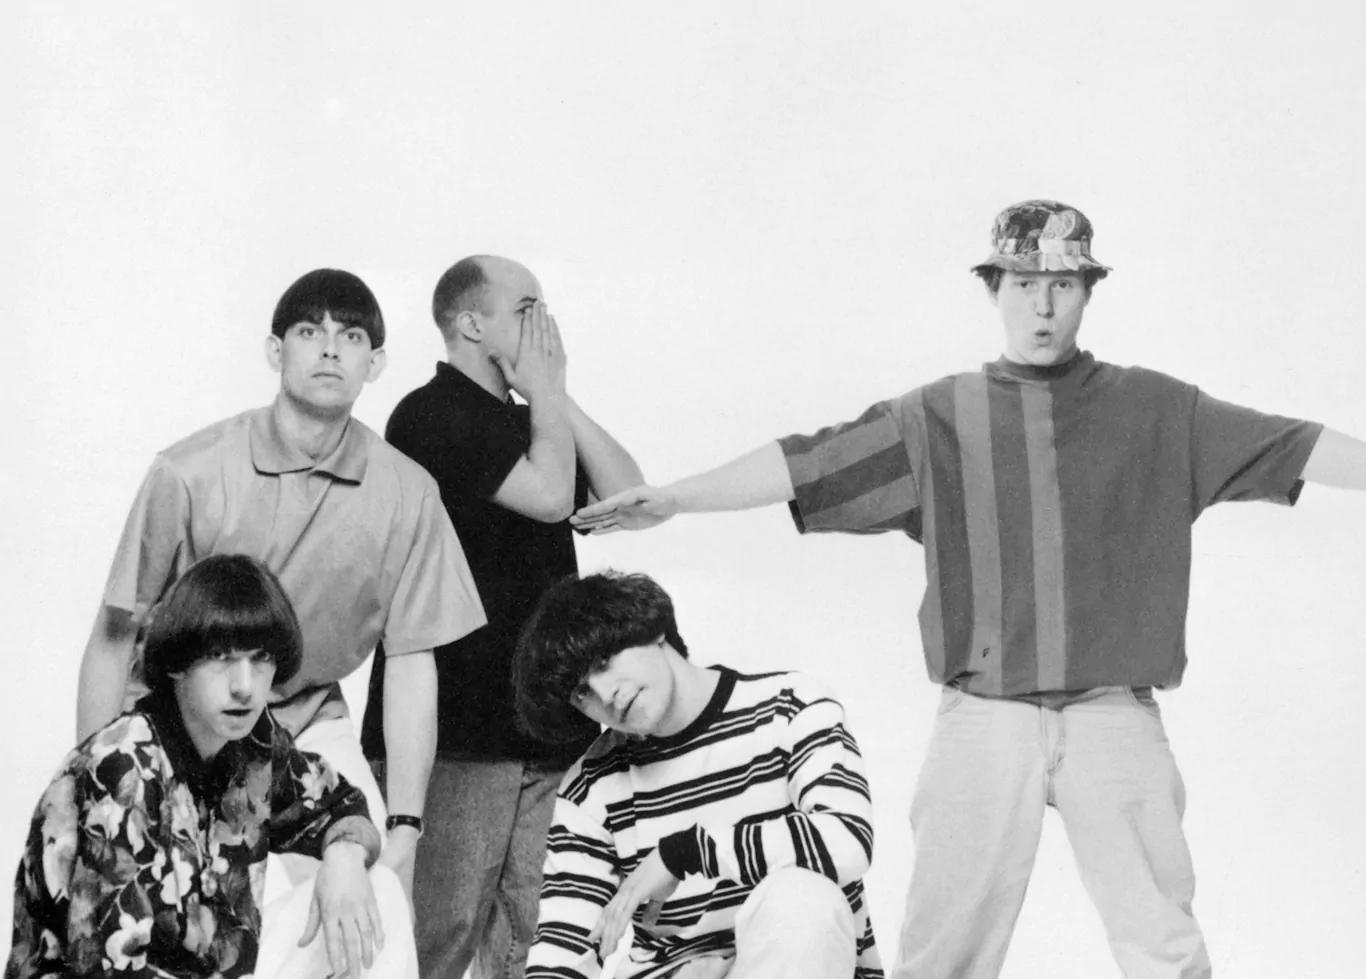 INSPIRAL CARPETS share The Go! Team Remix of ‘This Is How It Feels’